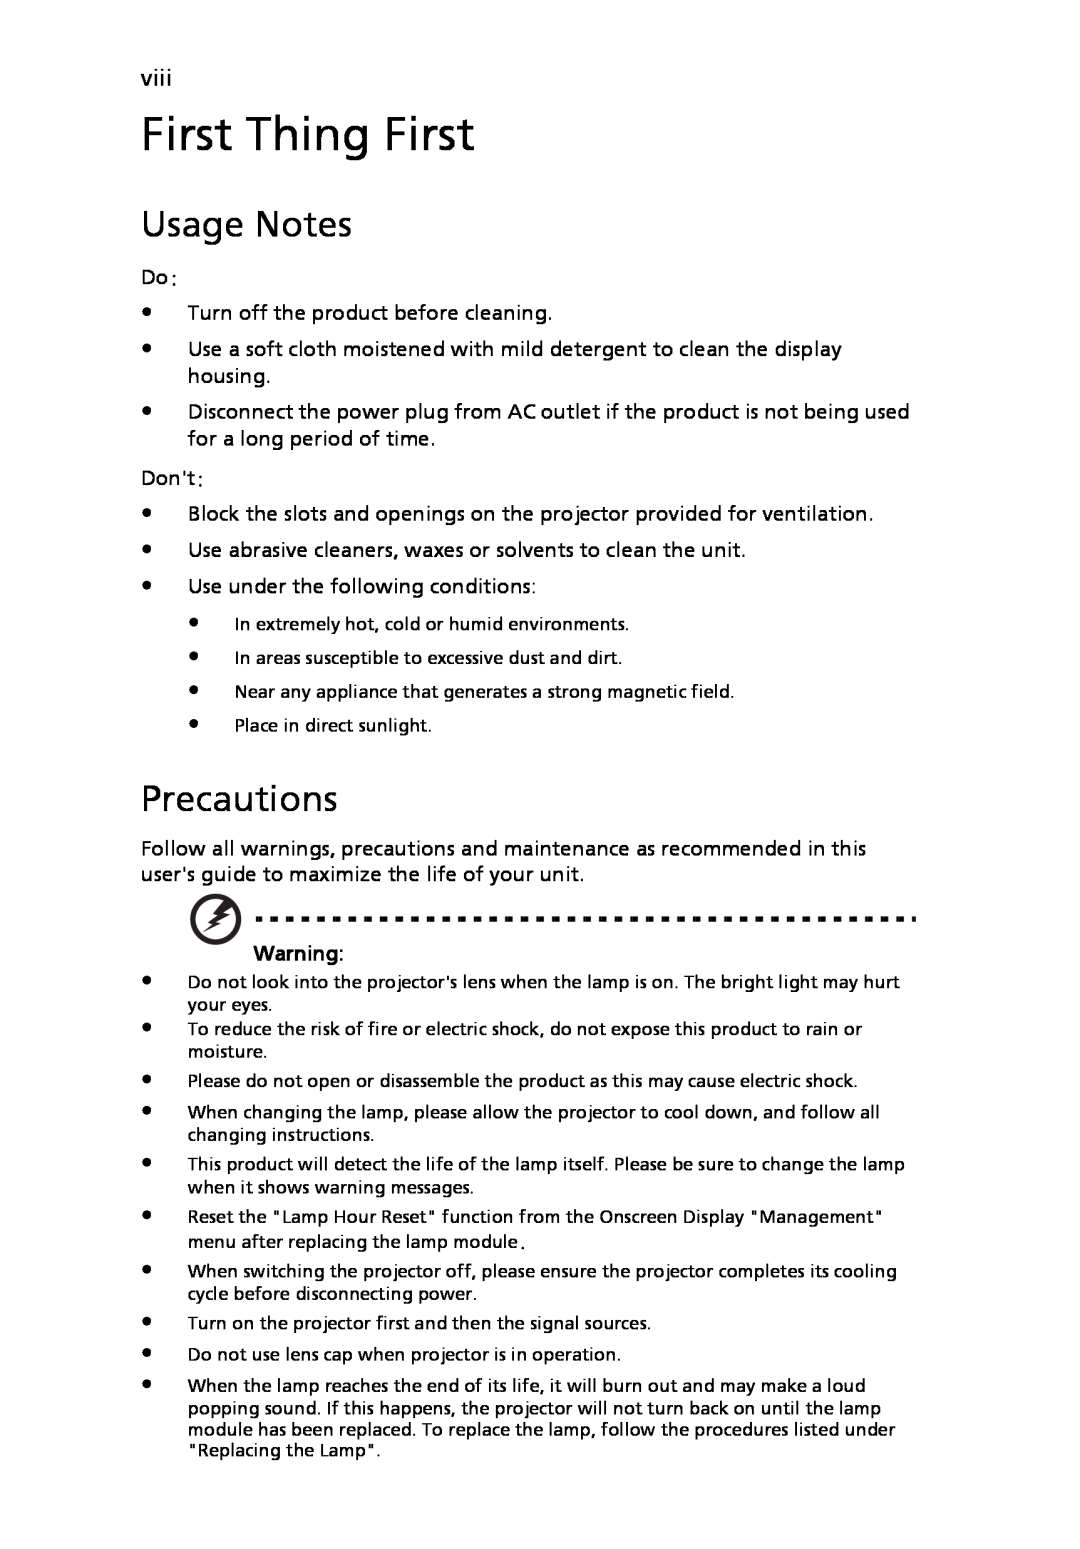 Acer P5205 manual First Thing First, Usage Notes, Precautions 